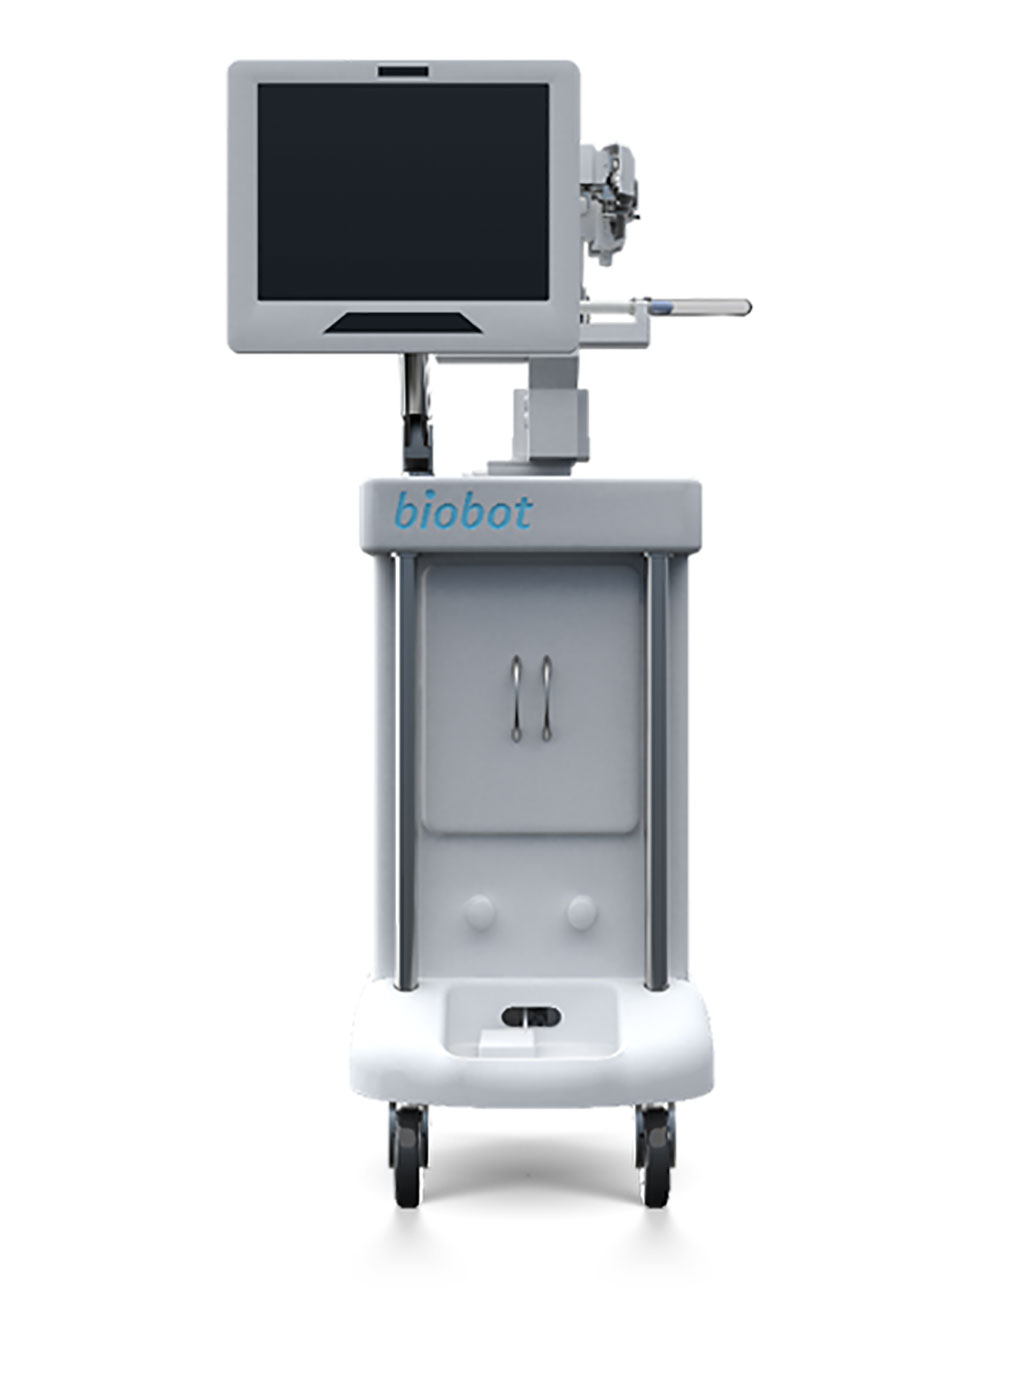 Image: iSR’obot Mona Lisa intelligent real-time robotic system (Photo courtesy of Biobot Surgical)